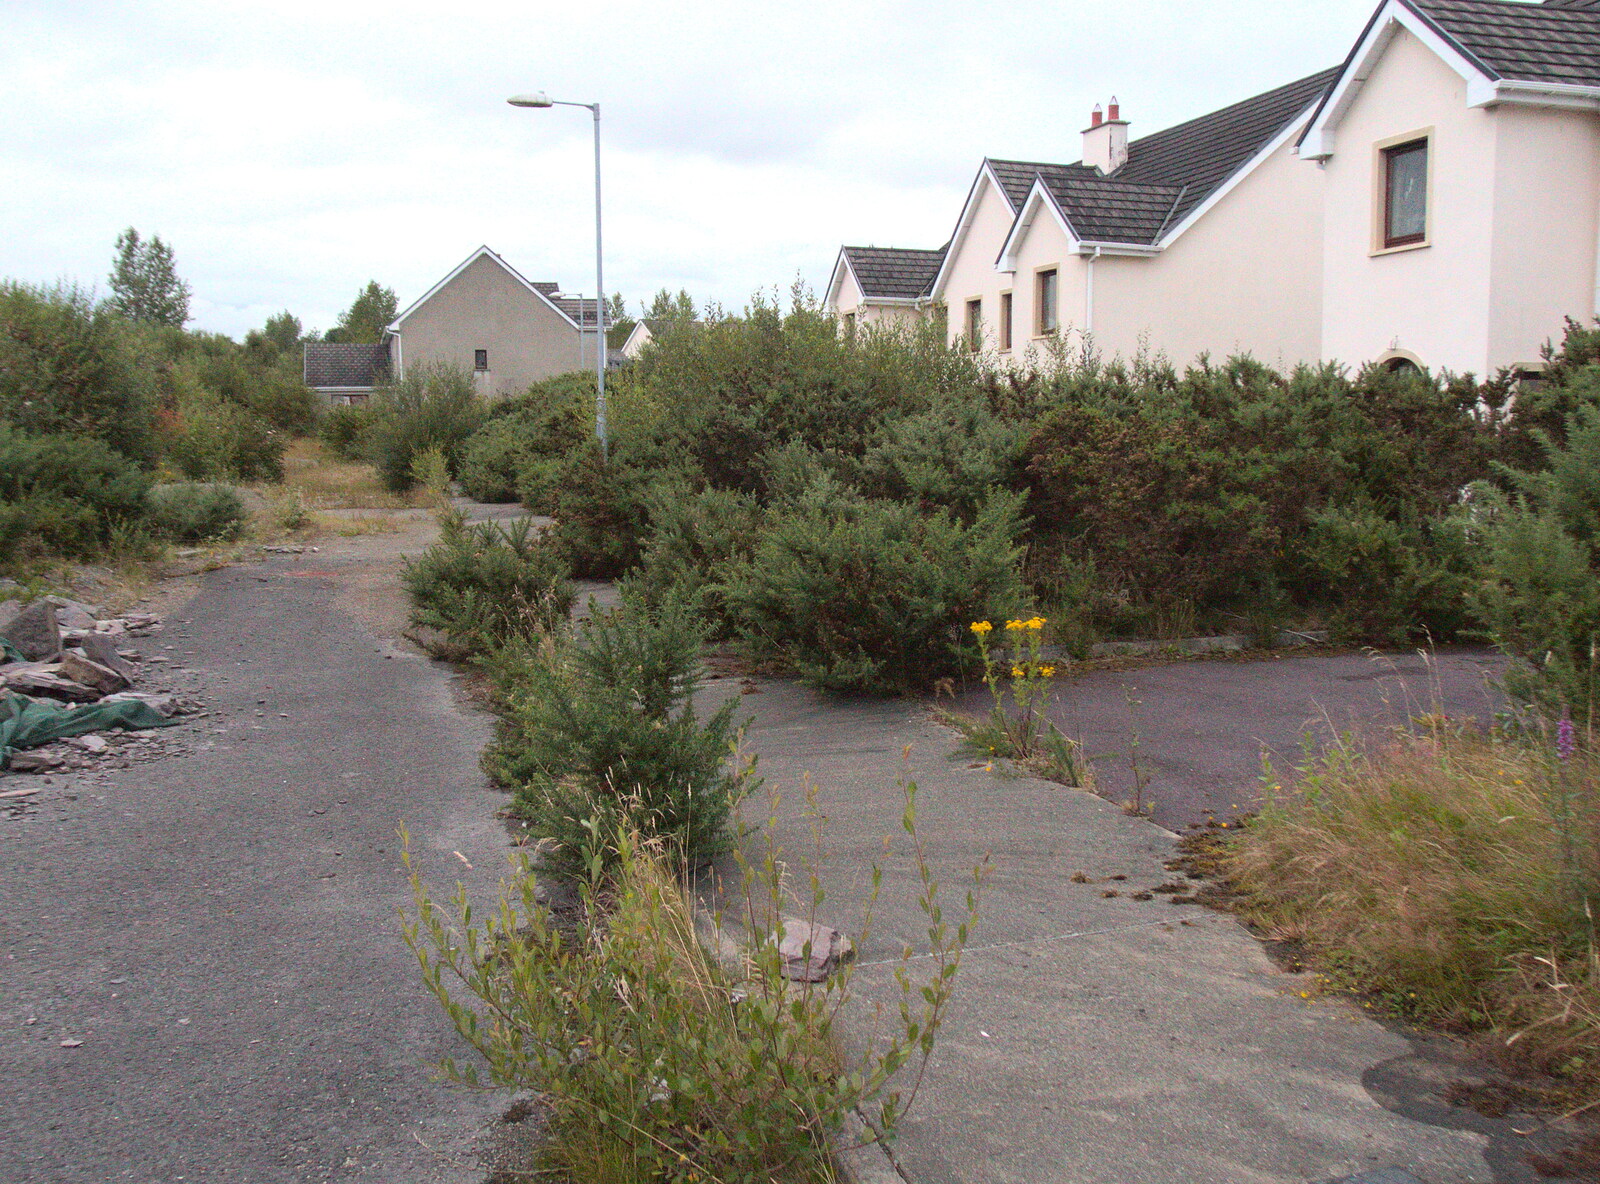 Nature reclaims the estate's main street from Baile an Sceilg to An tSnaidhme, Co. Kerry, Ireland - 31st July 2017